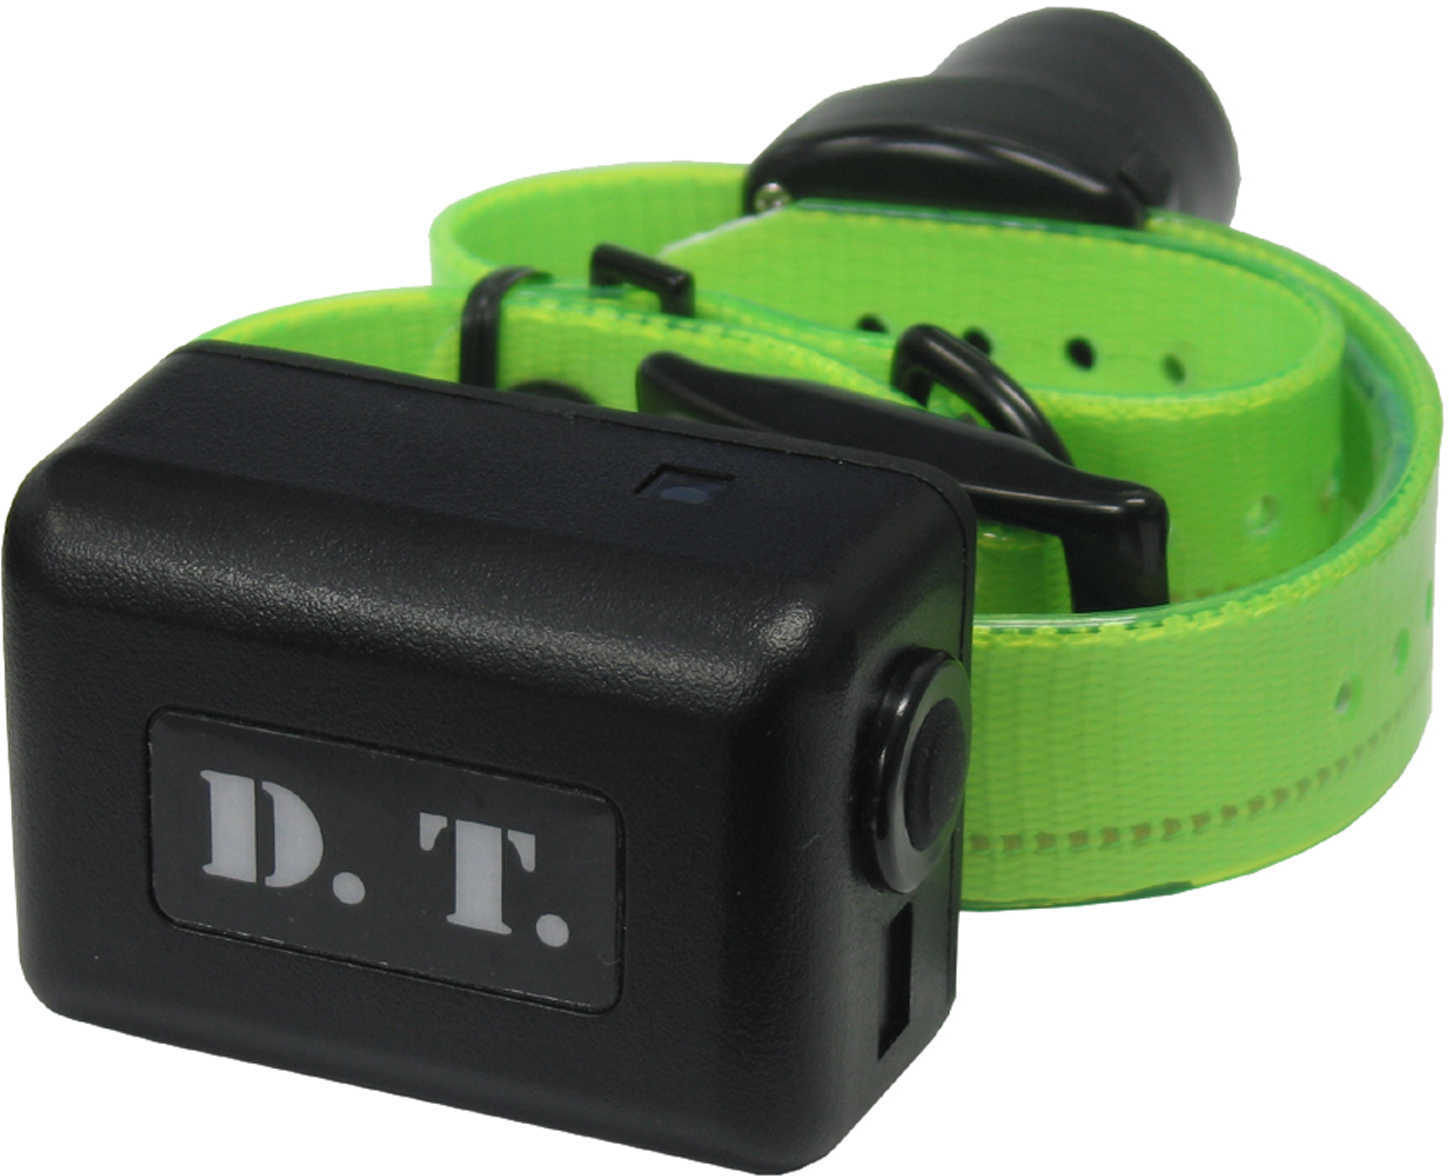 DT Systems Add-On/Replacement Beeper Collar Receiver, Green Md: 1850 AddOn-G